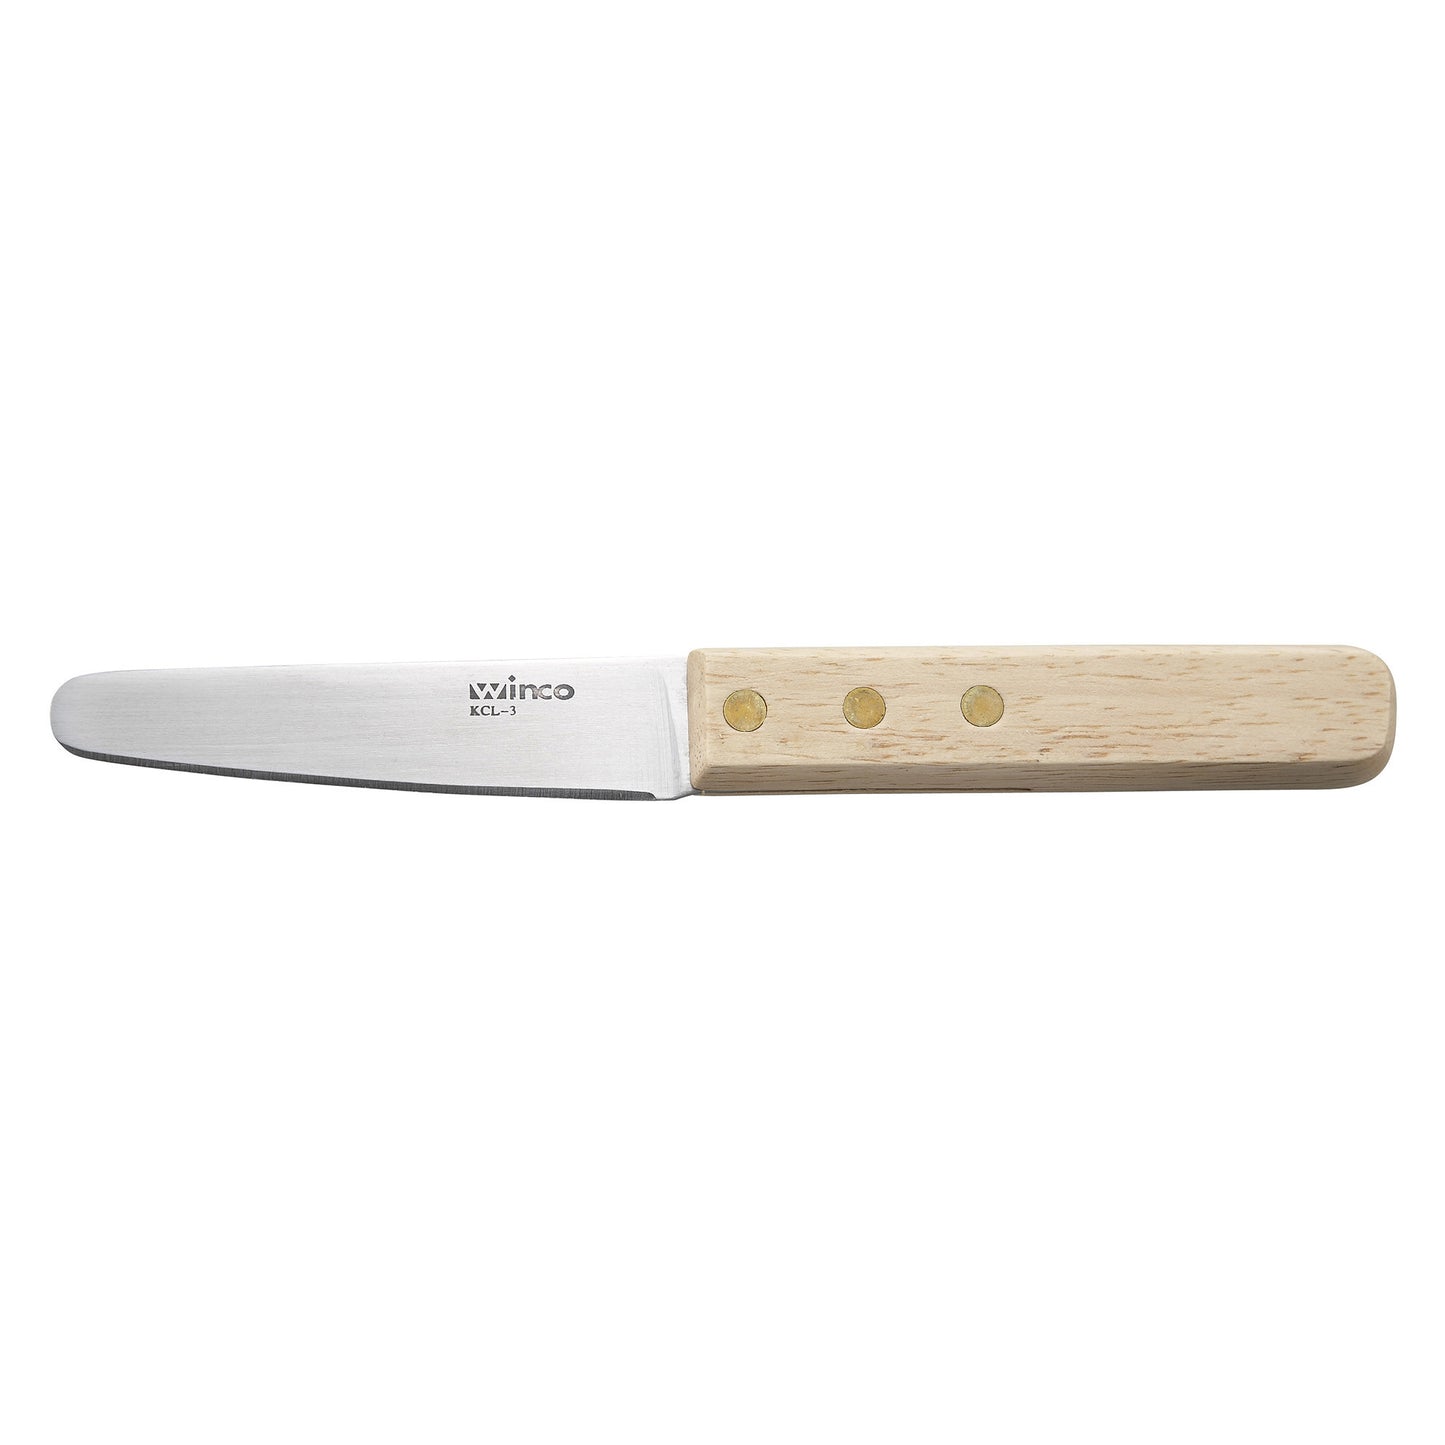 KCL-3 - 3-1/2" Blade Oyster/Clam Knife, Wooden Handle